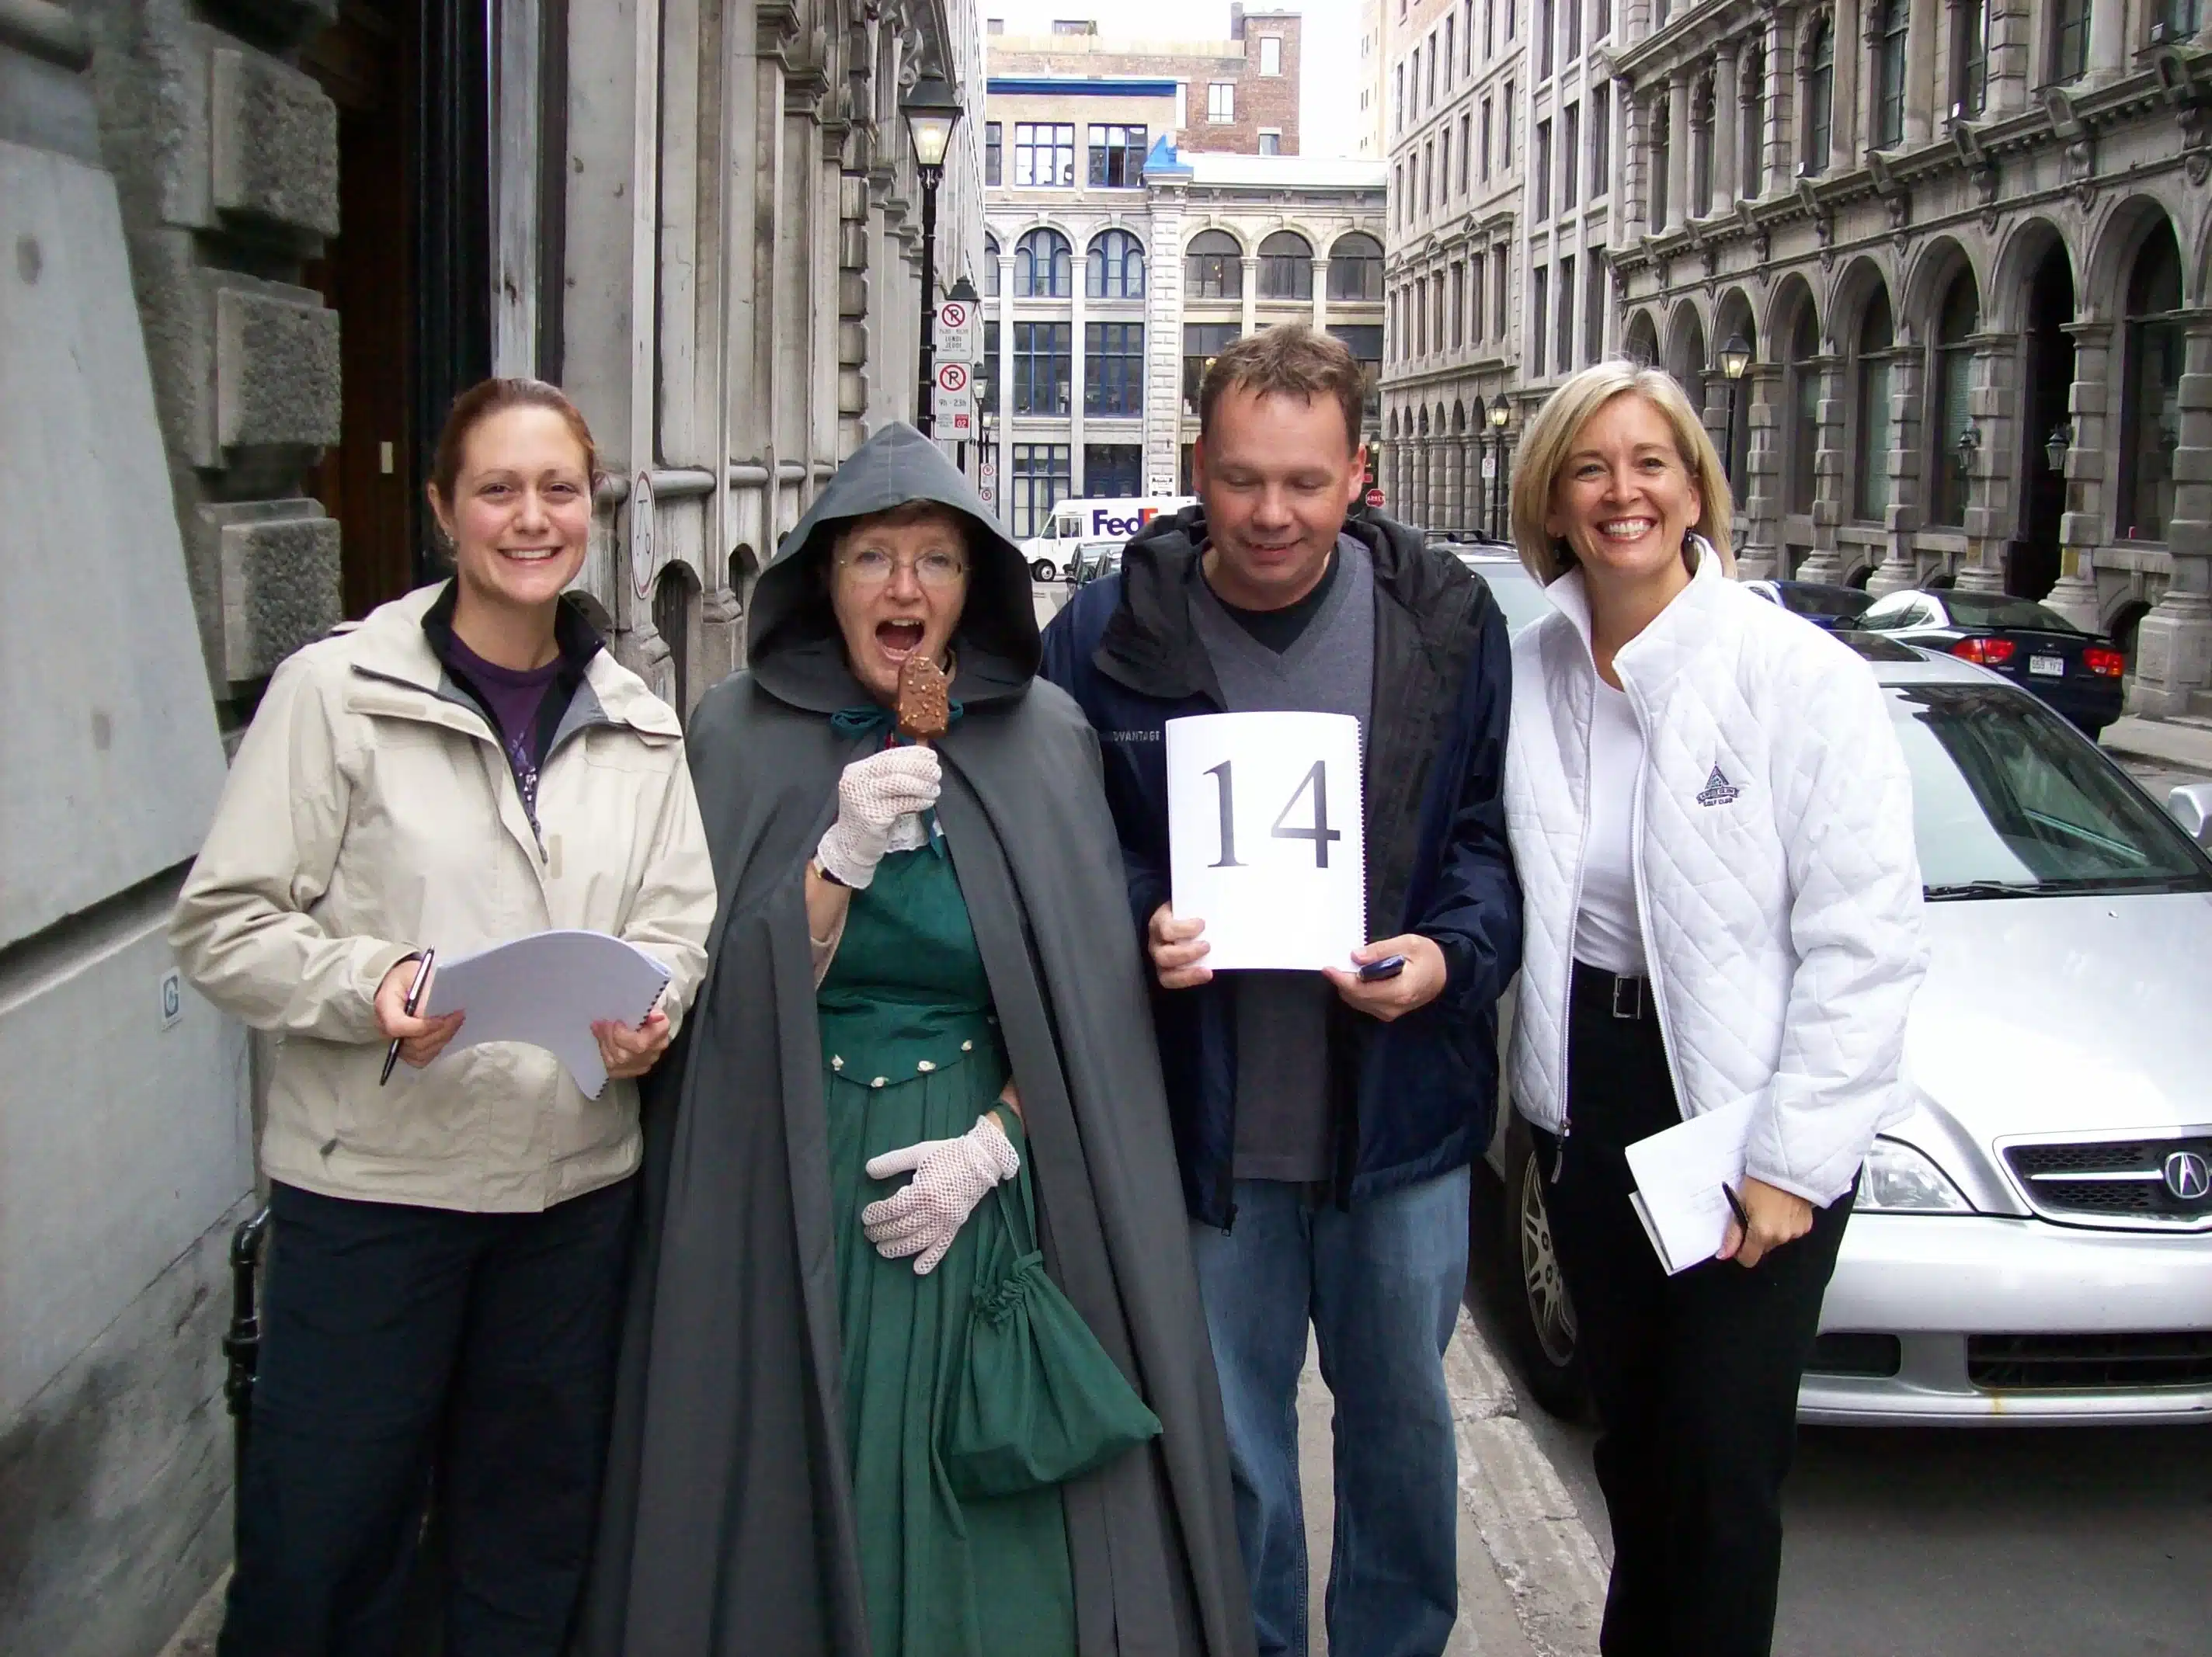 Scavenger hunt team poses with someone dressed as a habitant.